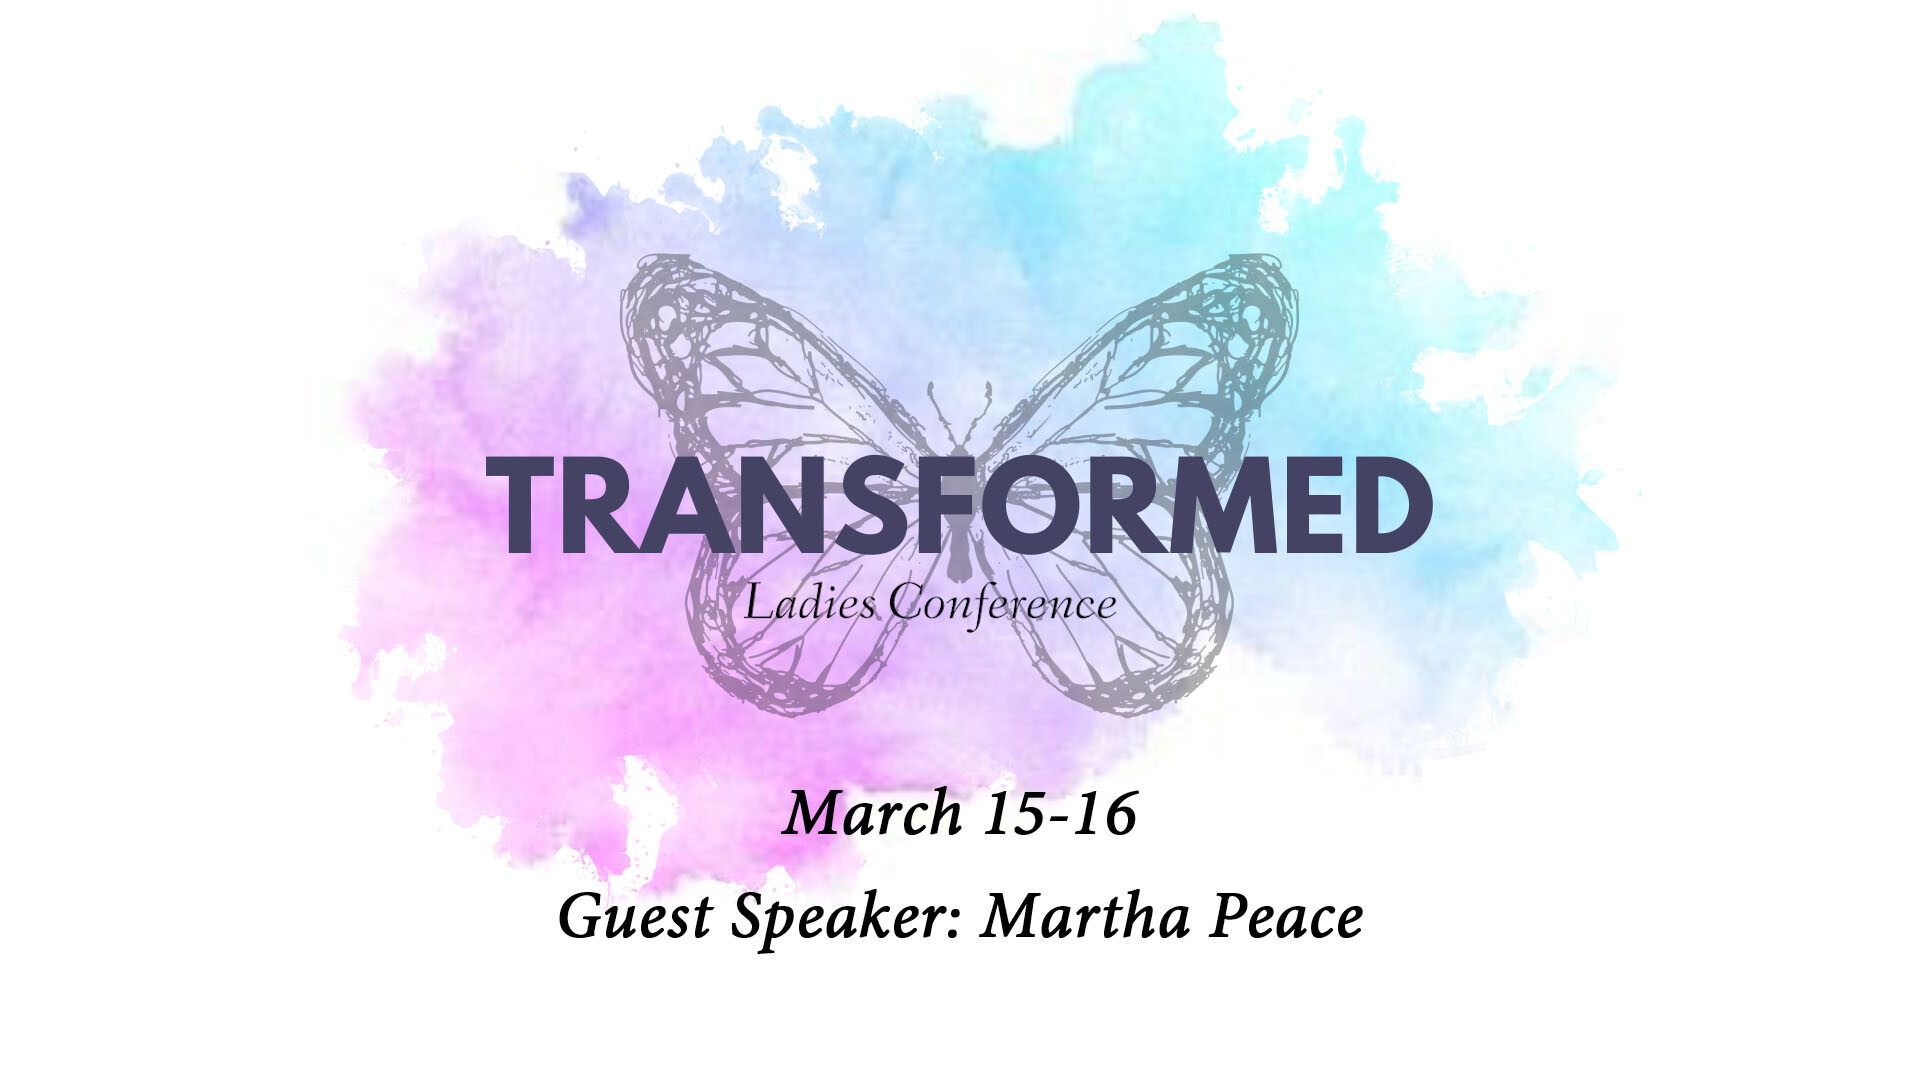 Session 4: Transformed Women's Conference